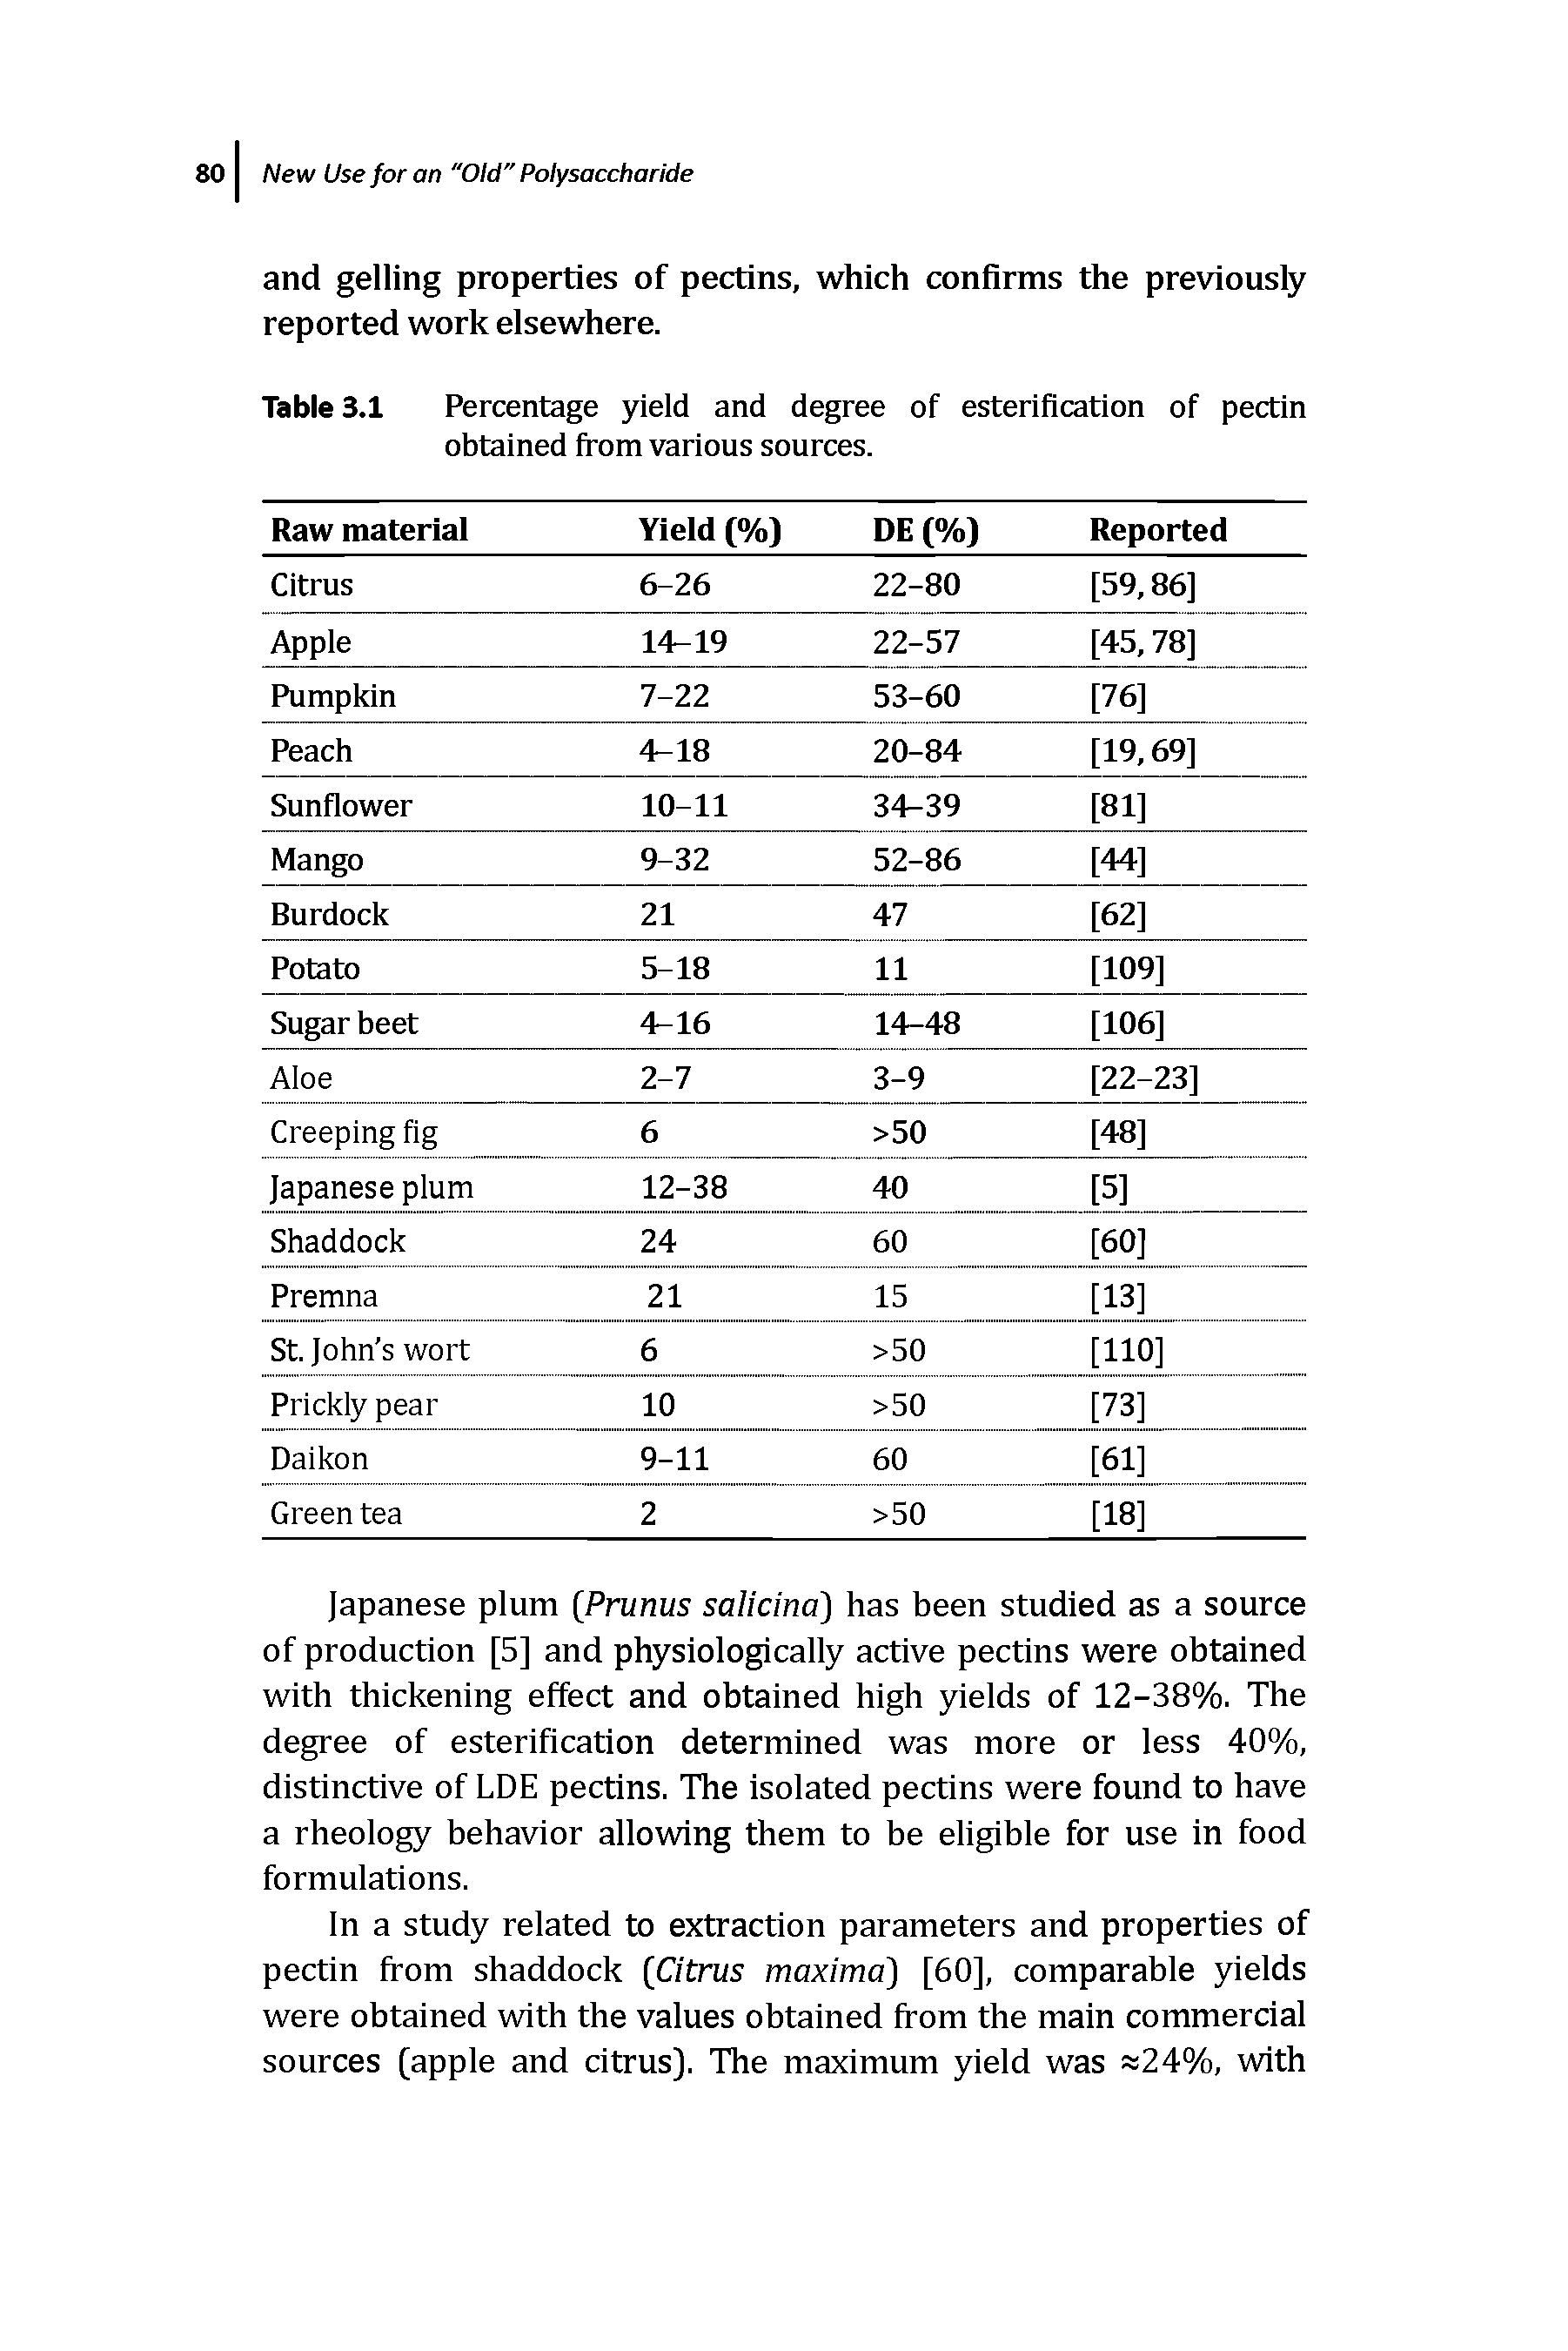 Table 3.1 Percentage yield and degree of esterification of pectin obtained from various sources.